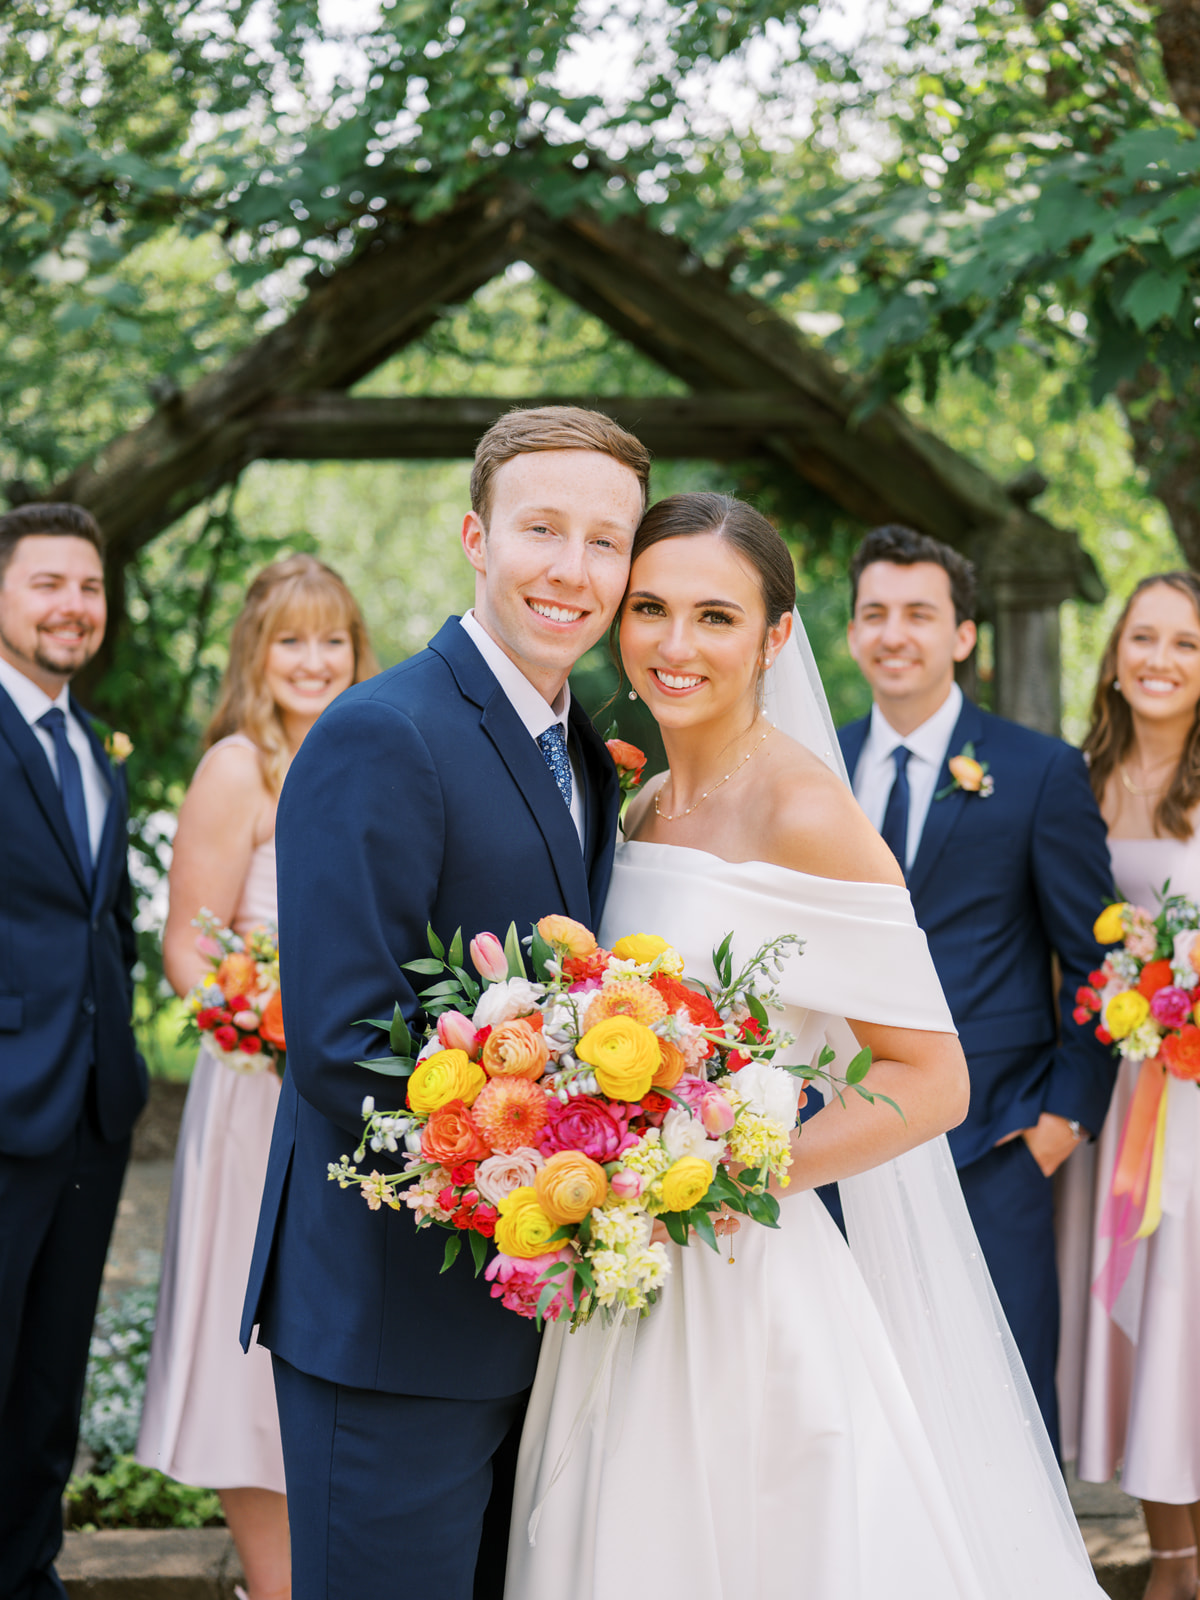 Orchid House Winery wedding portraits of bridal party